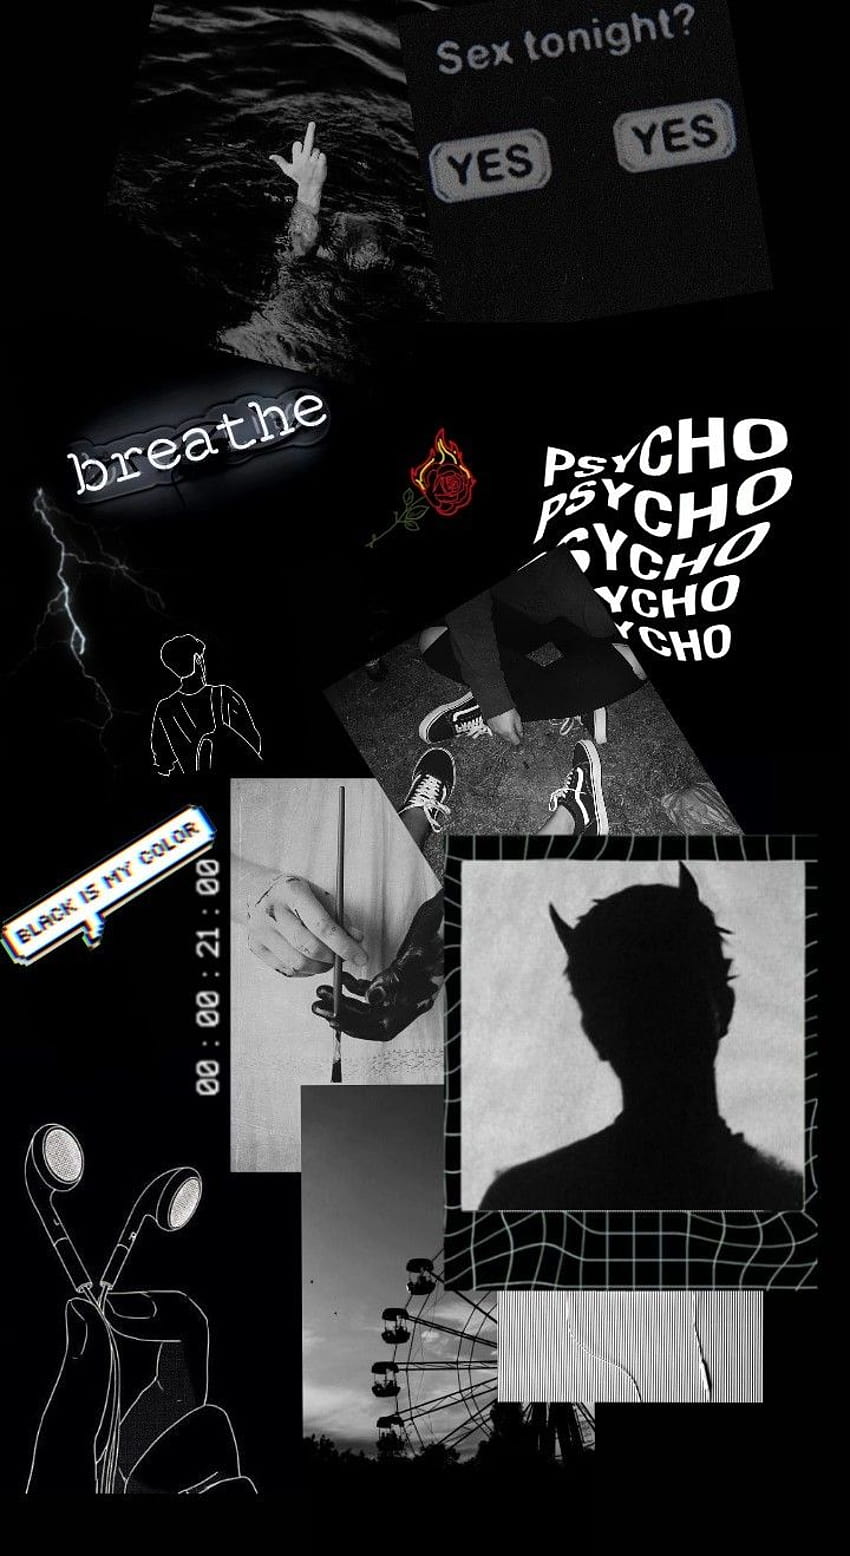 Psycopat Aesthetic posted by Christopher Anderson, psychotic aesthetic HD phone wallpaper